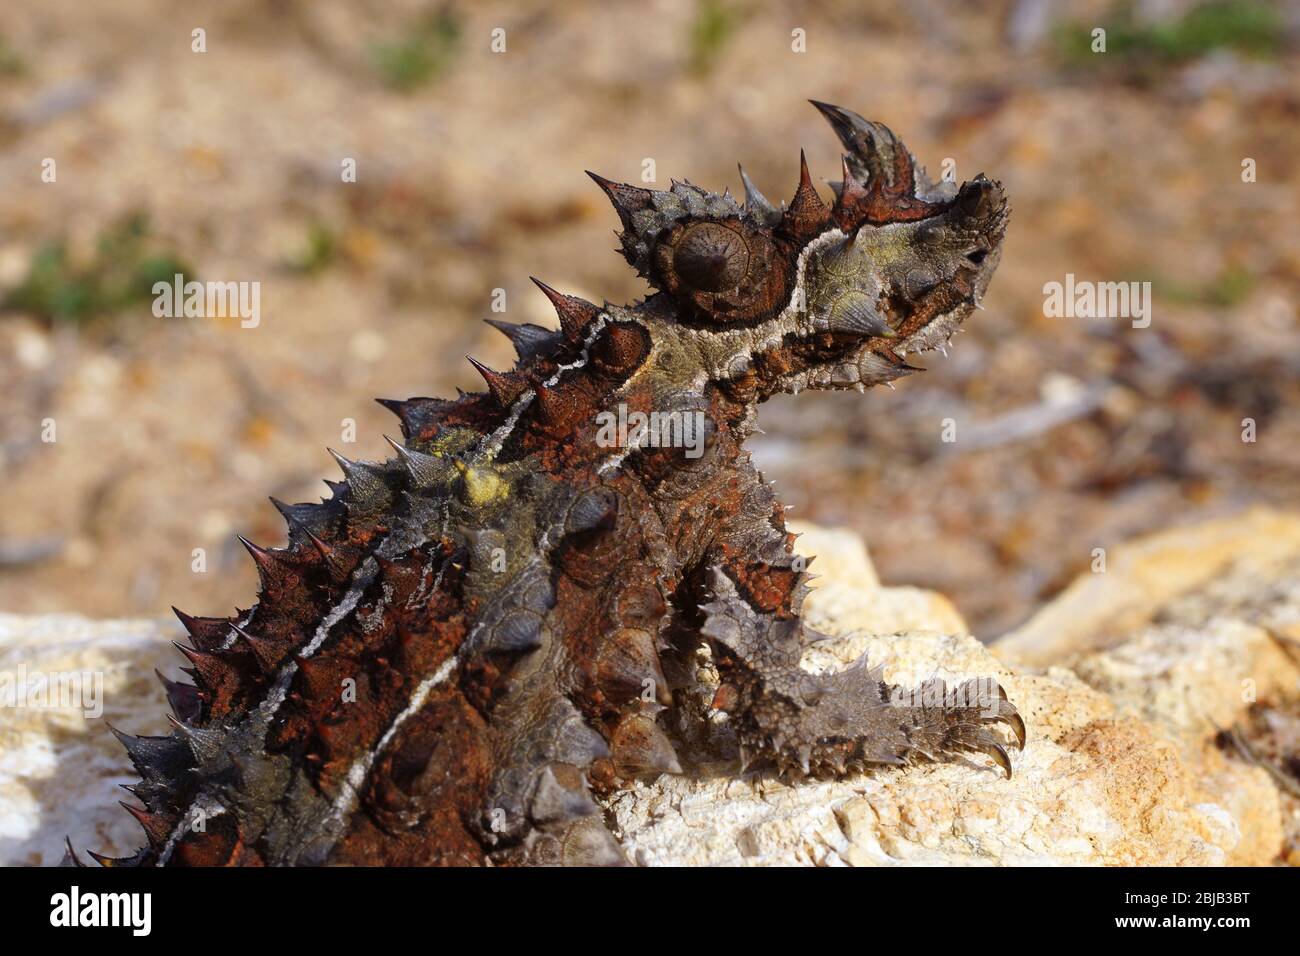 Thorny devil, Moloch horridus, ant-eating lizard in Western Australia, lateral view Stock Photo